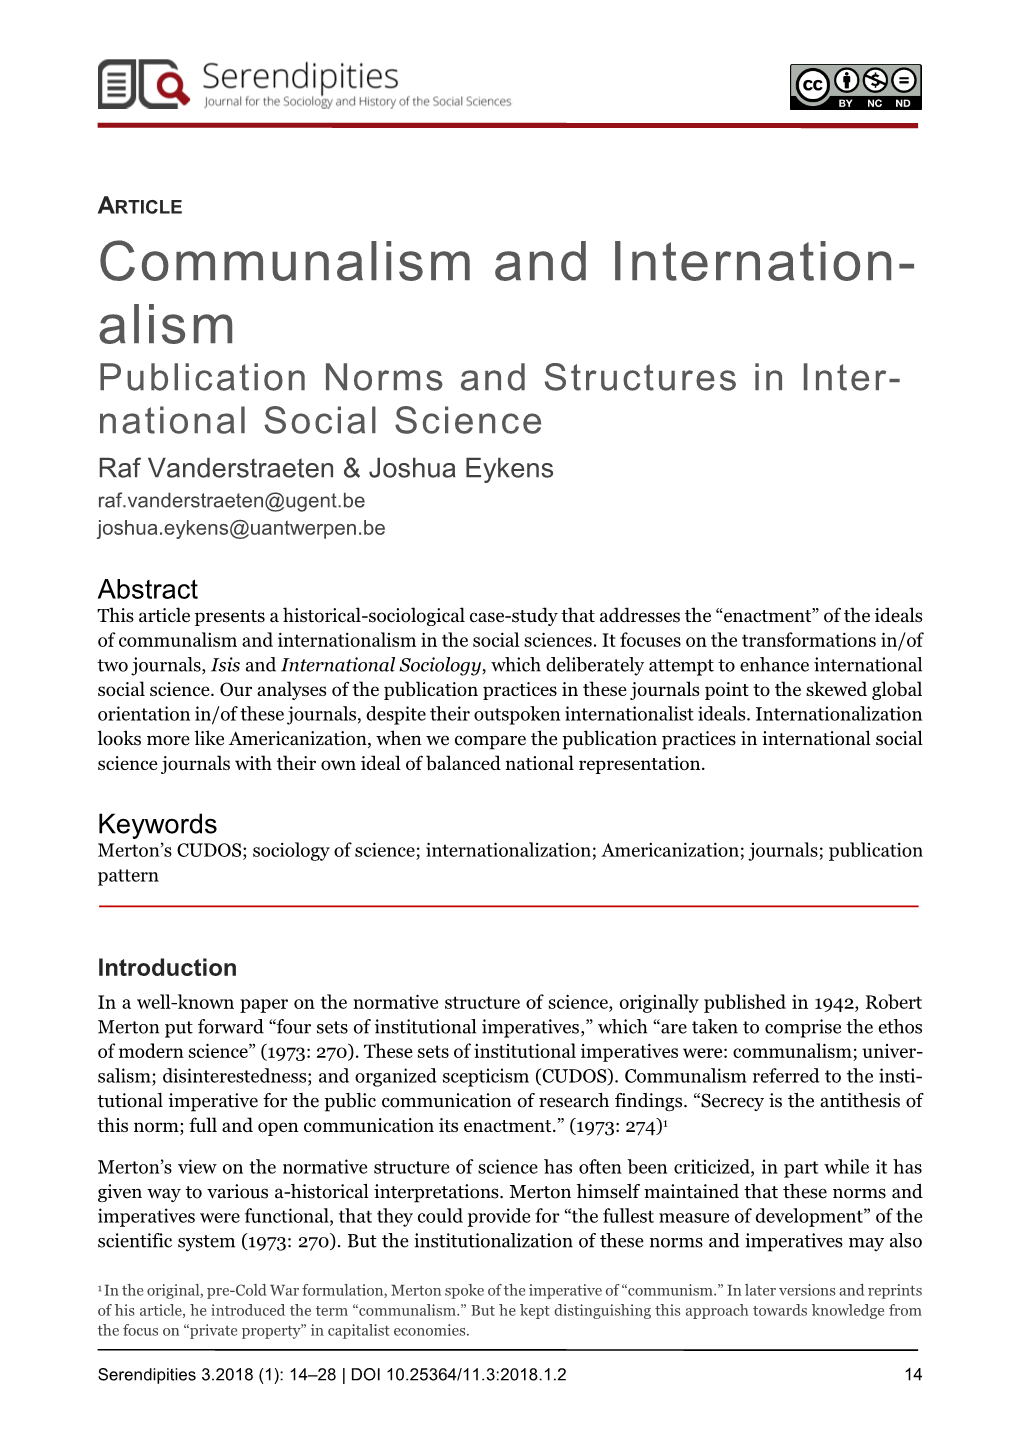 Communalism and Internationalism in the Social Sciences